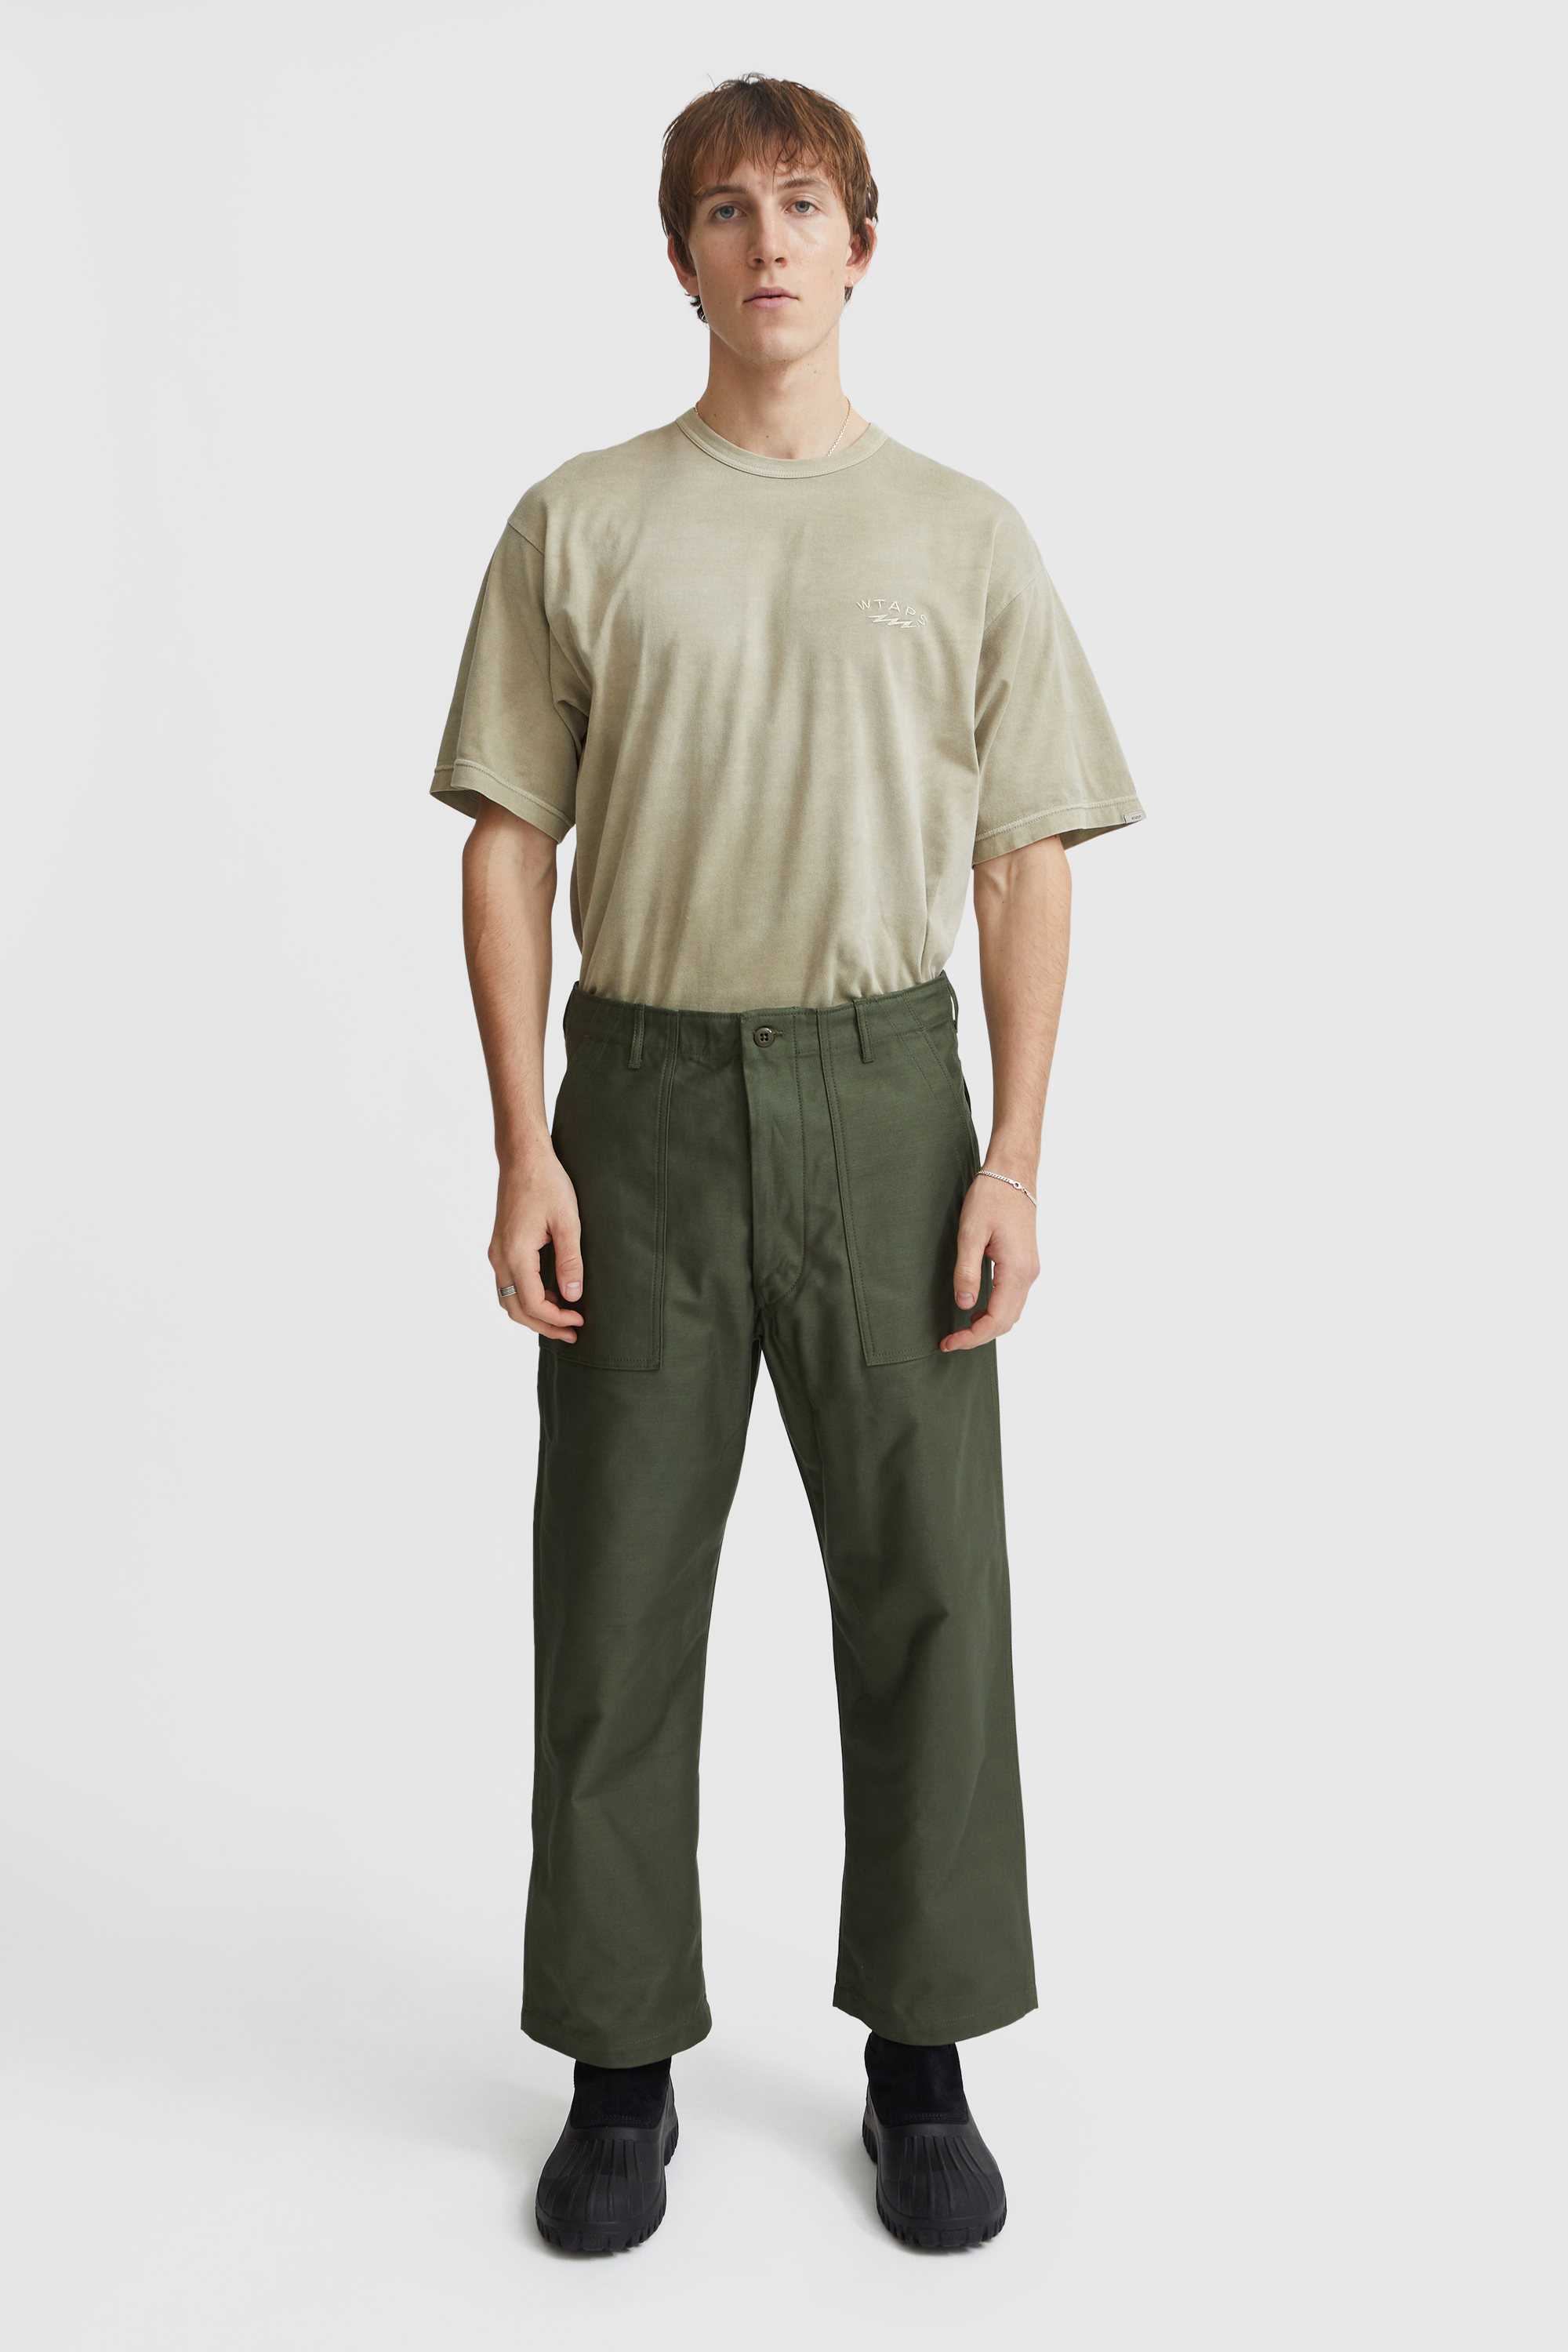 2019AW☆ WTAPS WMILL-TROUSER 02 TROUSERS - ワークパンツ/カーゴパンツ